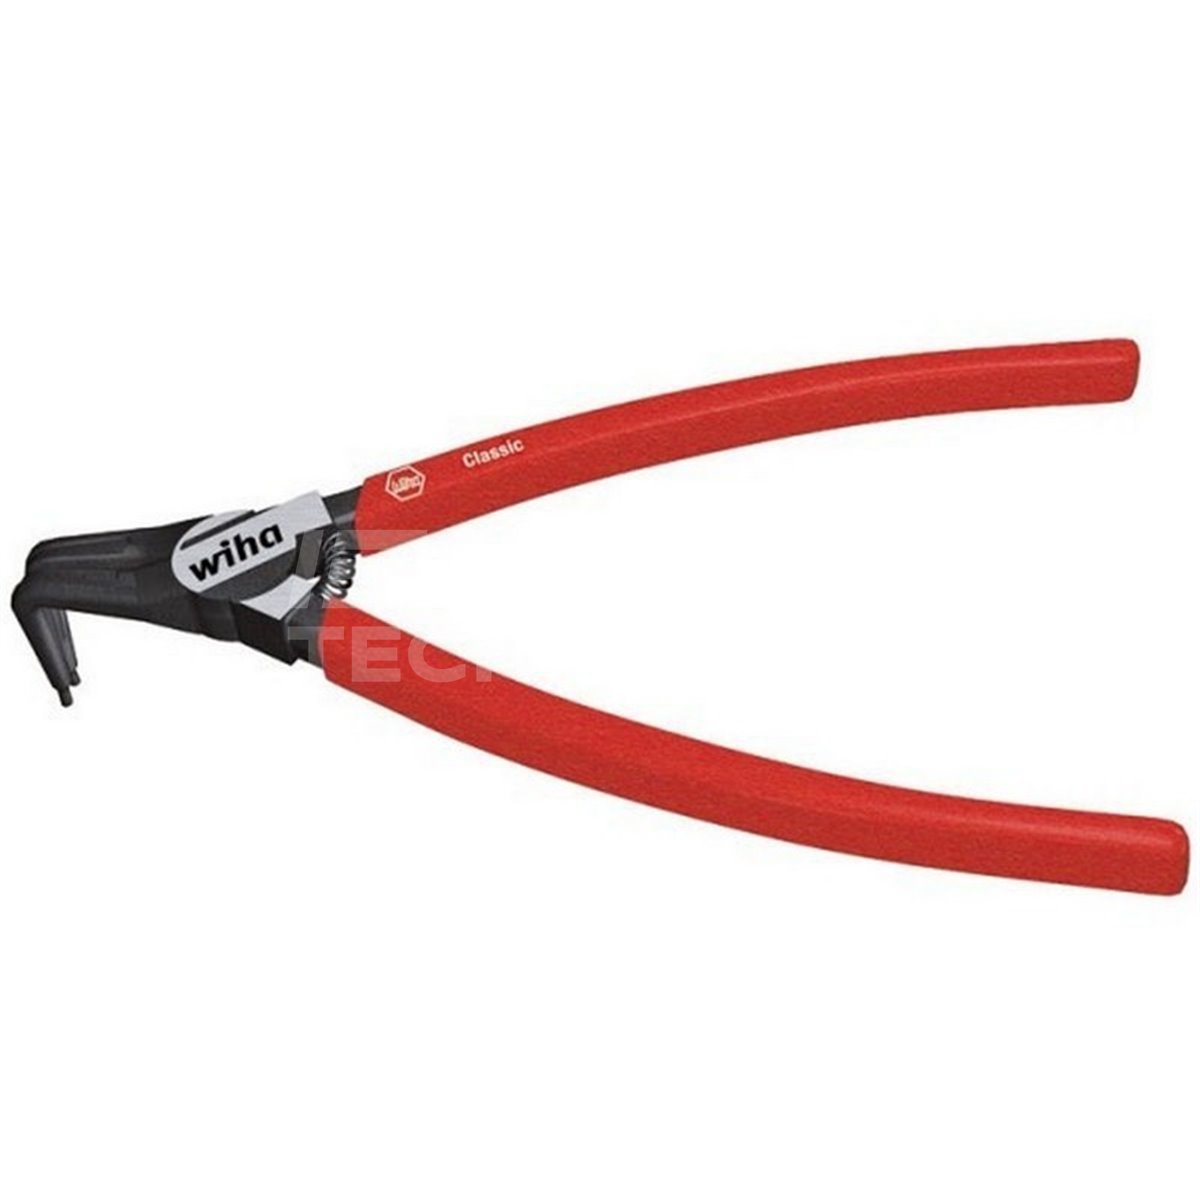 Classic ring pliers Z34101 A01 139mm Wiha 26794.